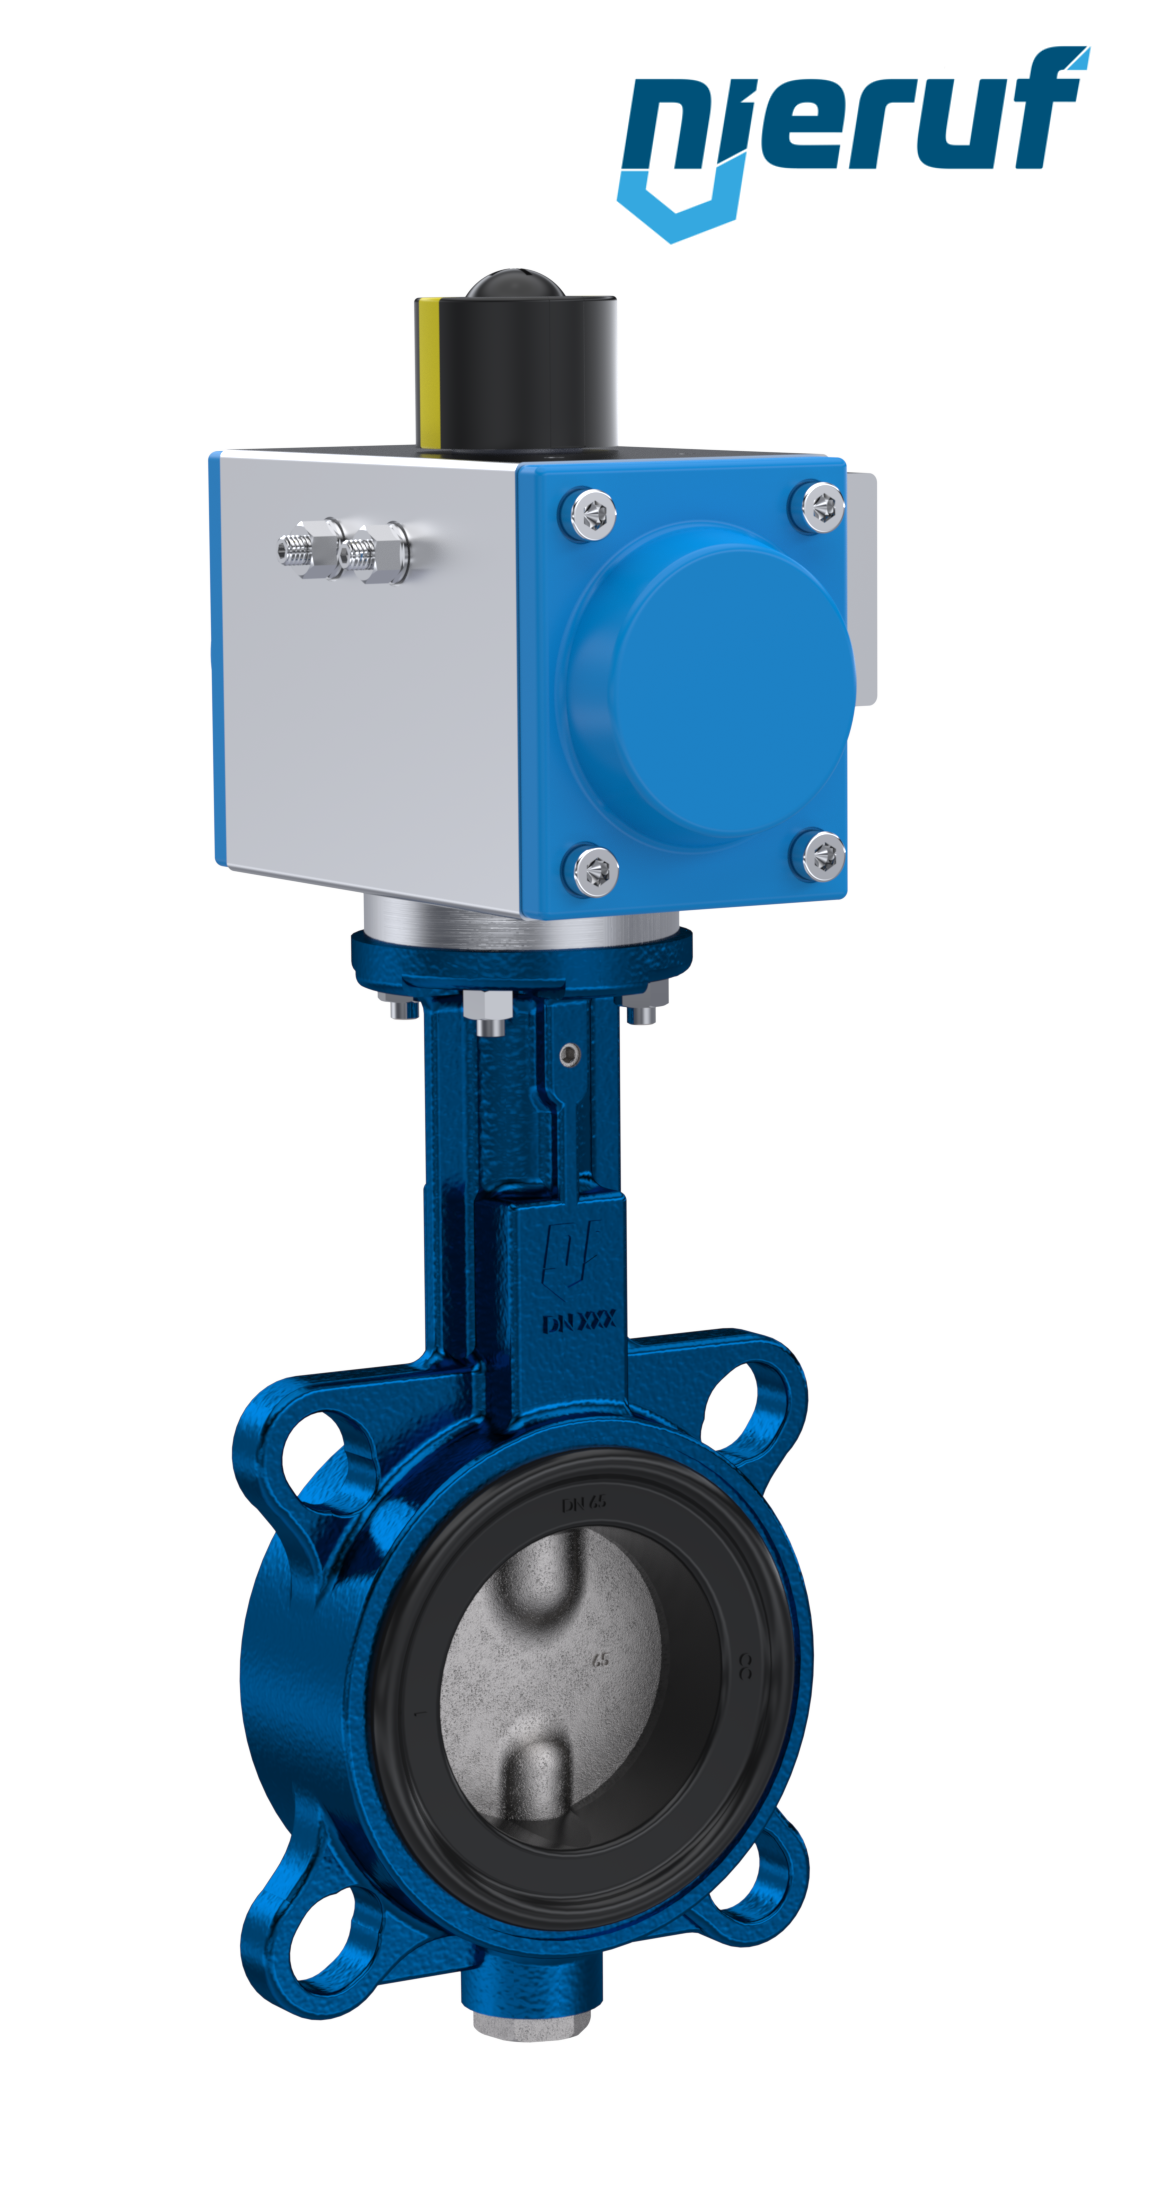 Butterfly valve DN 65 AK01 EPDM DVGW drinking water, WRAS, ACS, W270 pneumatic actuator double acting